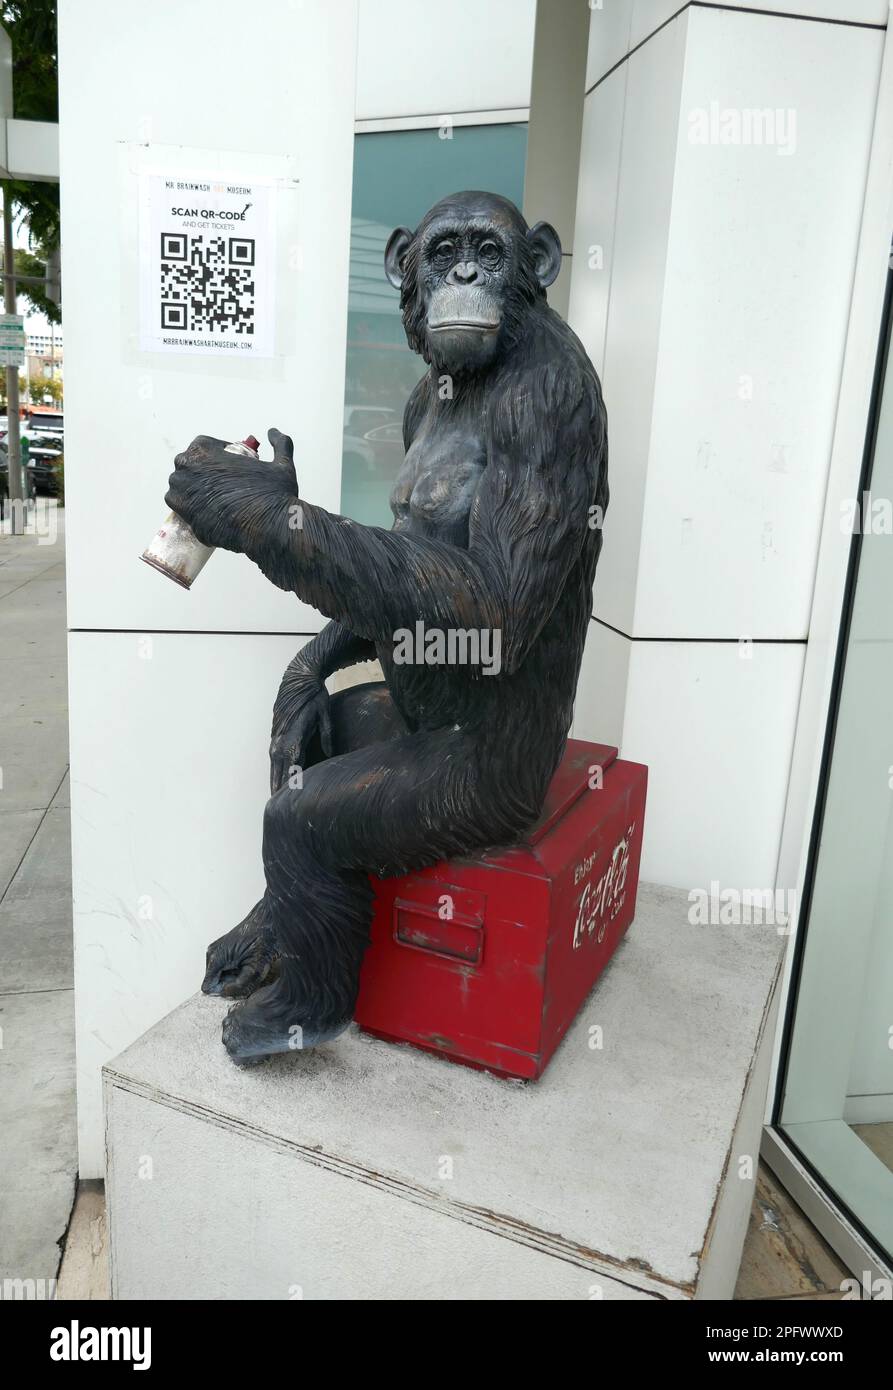 Beverly Hills, California, USA 18th March 2023 Chiimpanzee at Art Museum in Beverly Hills, California, USA. Photo by Barry King/Alamy Stock Photo Stock Photo